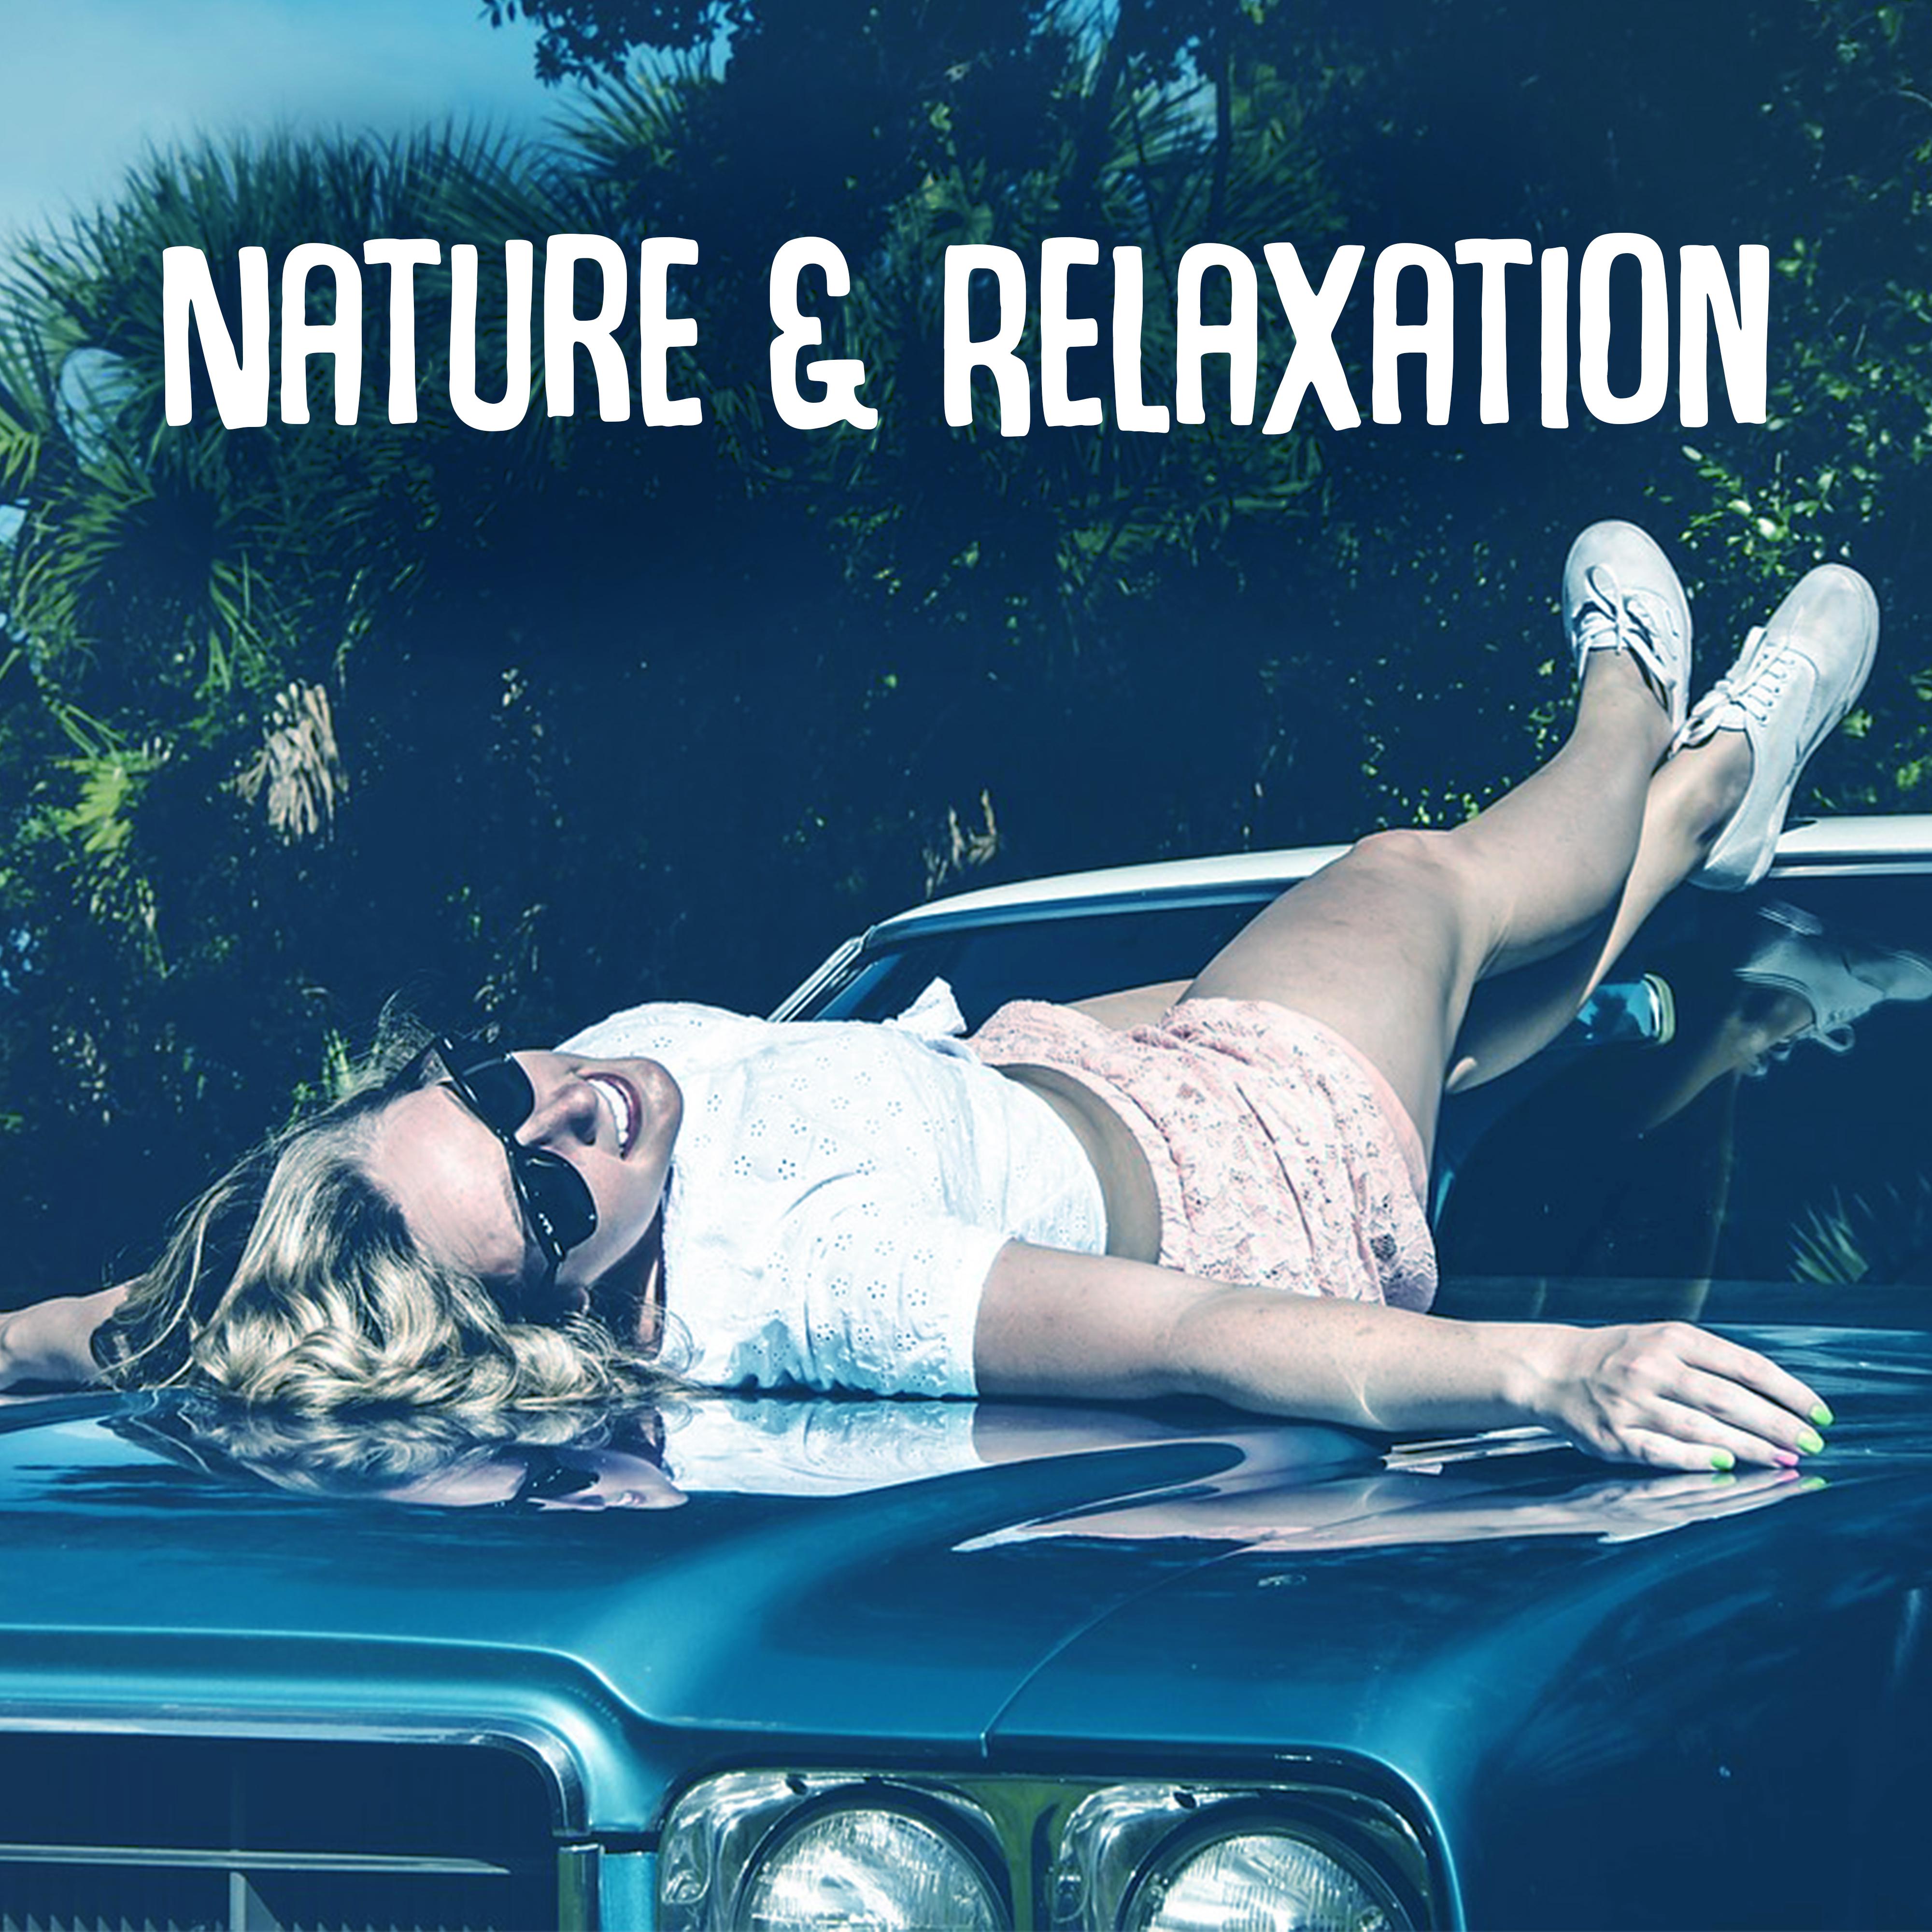 Nature & Relaxation – Water Sounds, Deep Rest, Gentle Silence, Natural Piano, Soothing Rain, Nature Sounds, Chillout